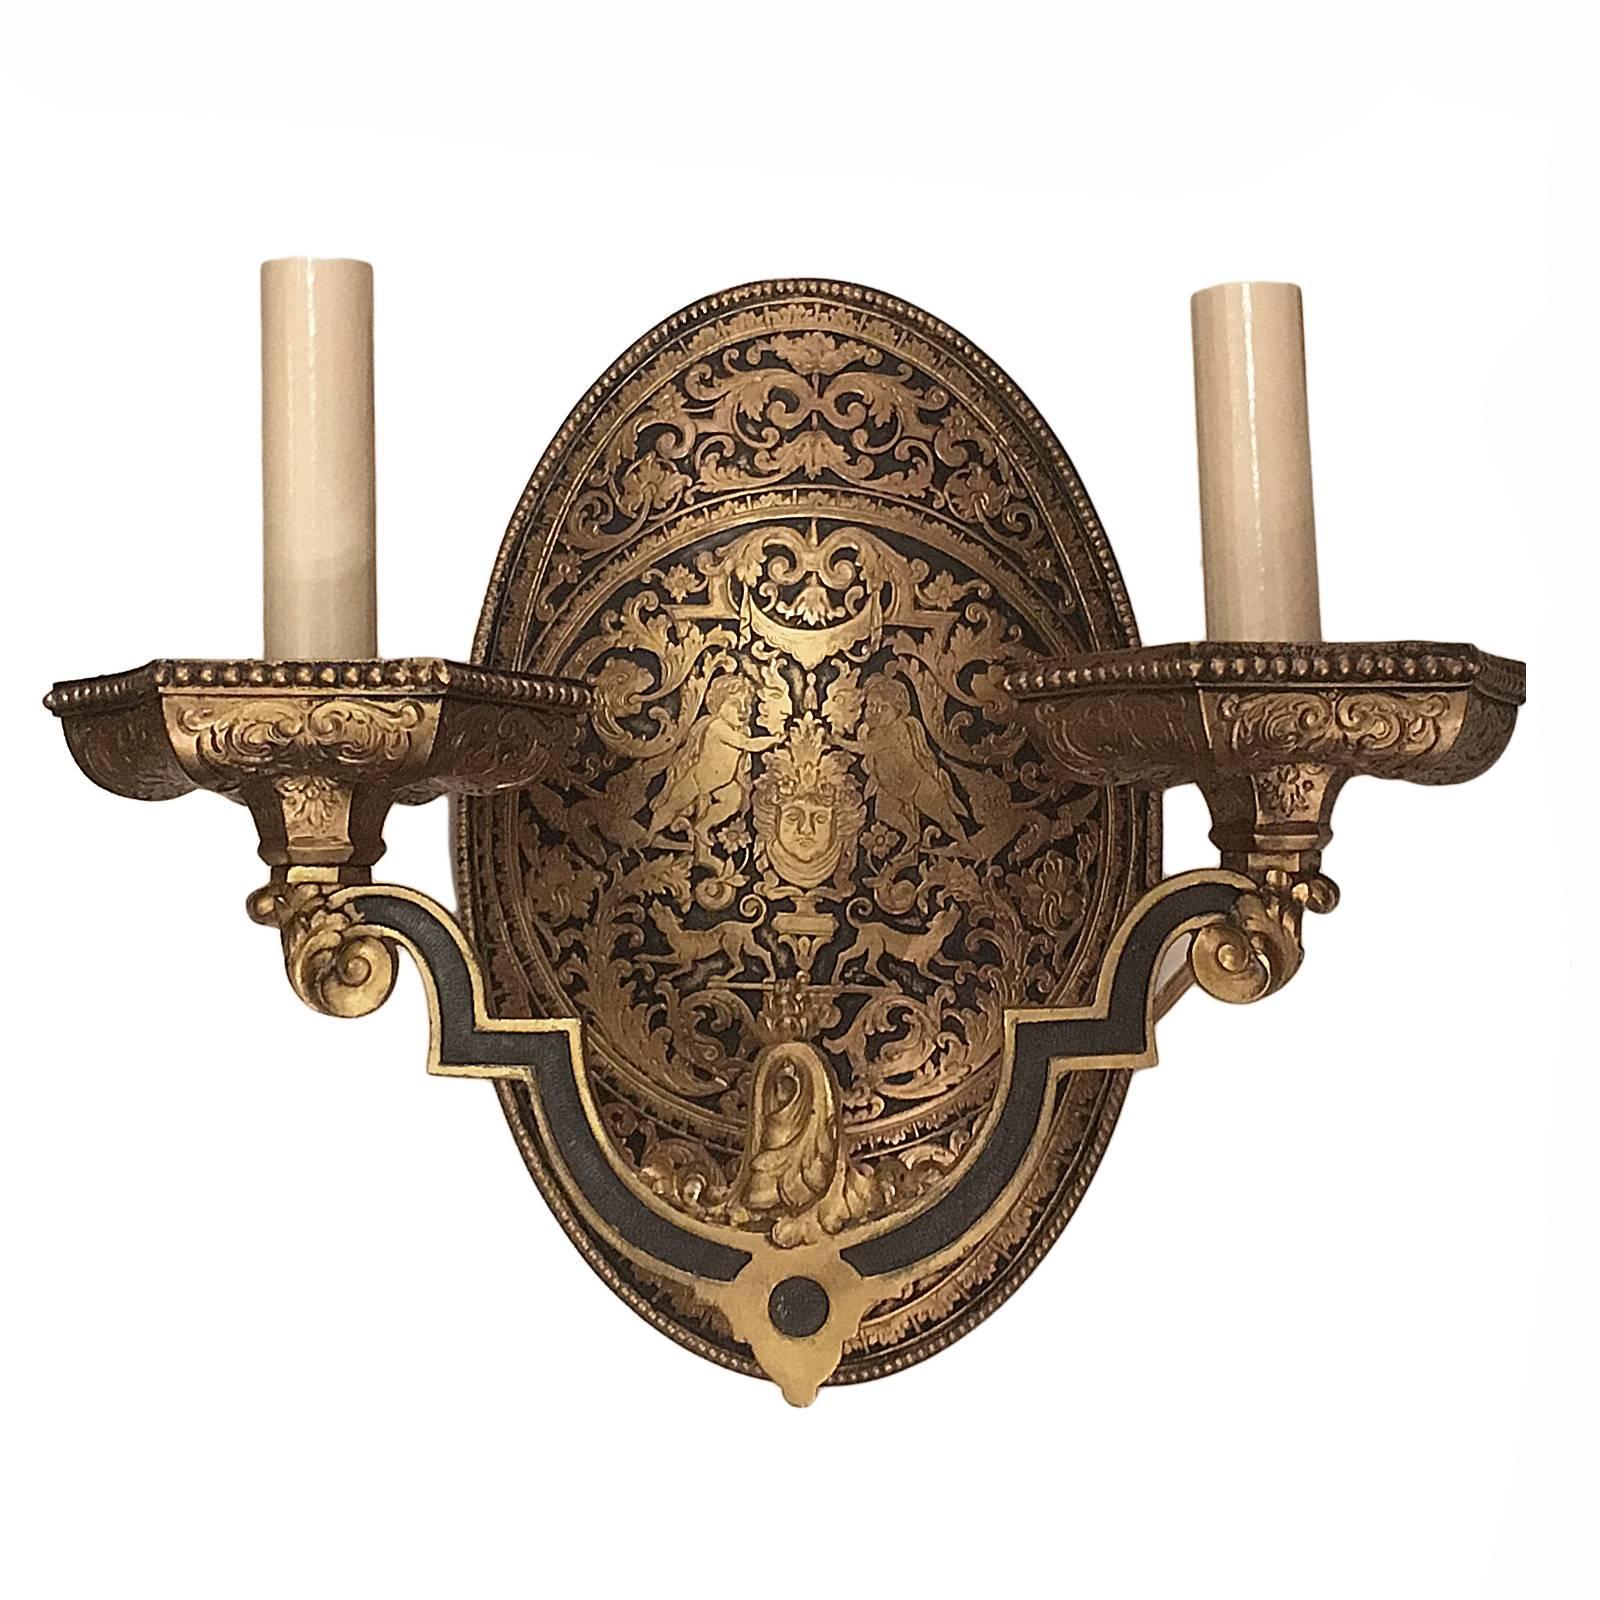 A set of four neoclassic style double light gilt sconces with original finish. Oval backplate with stylized foliage and arabesques, hounds and putti. The price is per piece. Sold in pairs. 

Measurements:
Height 14 in.
Depth 5.5 in.
Width/length 12